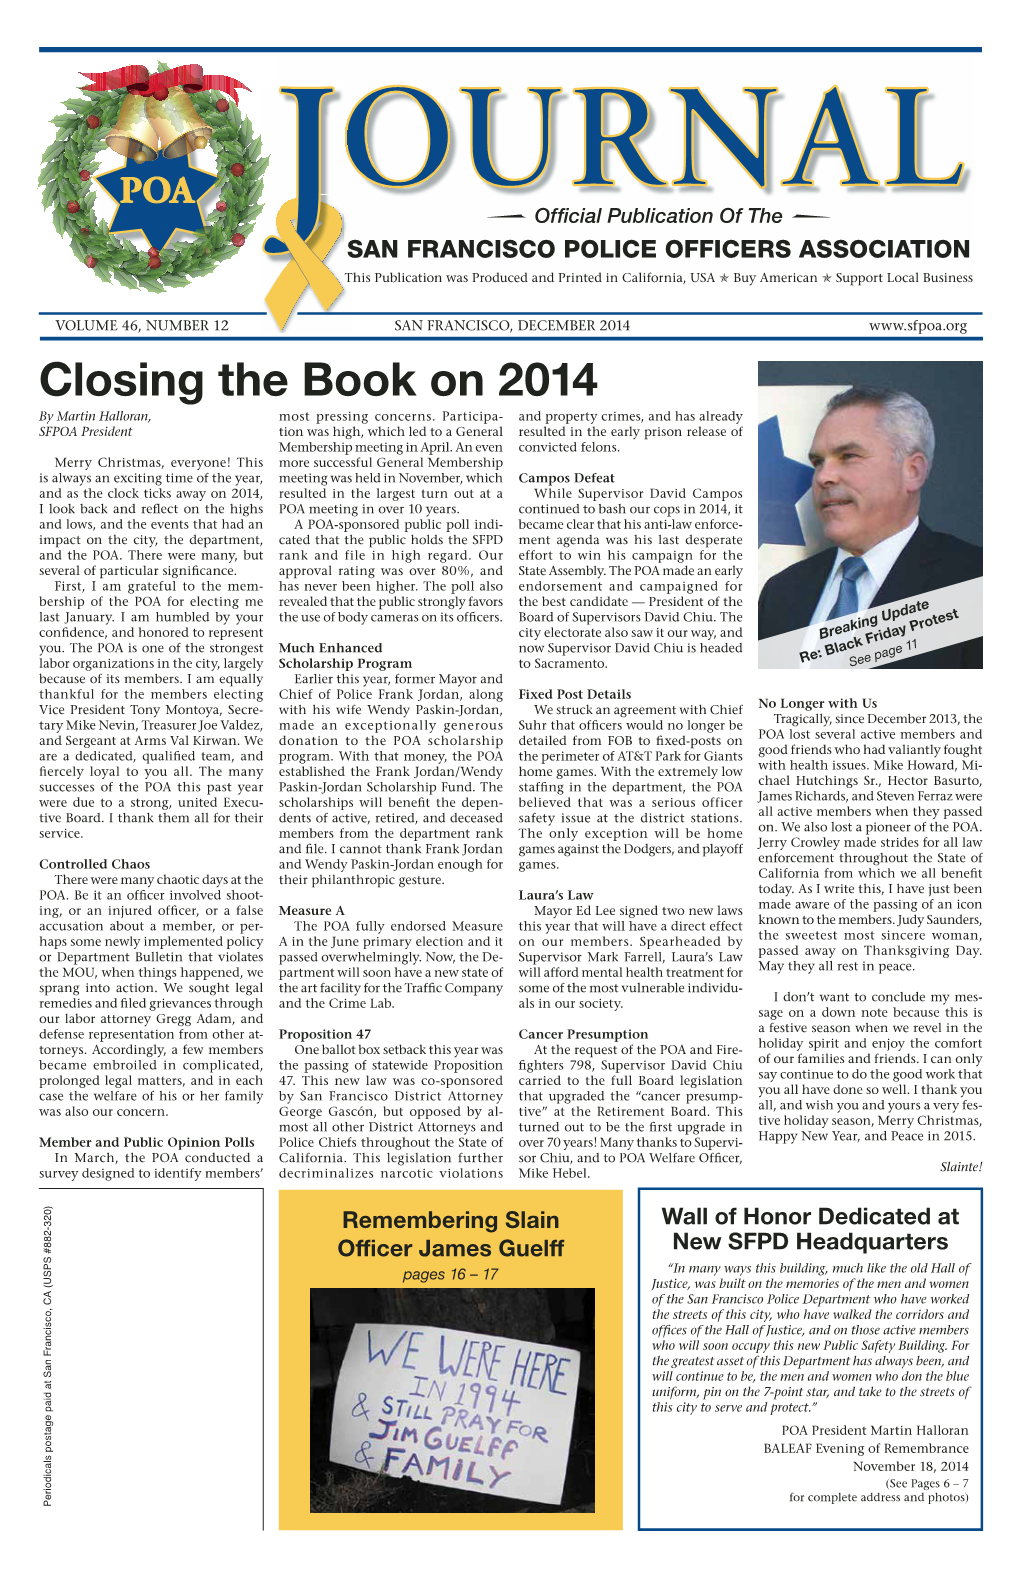 Closing the Book on 2014 by Martin Halloran, Most Pressing Concerns